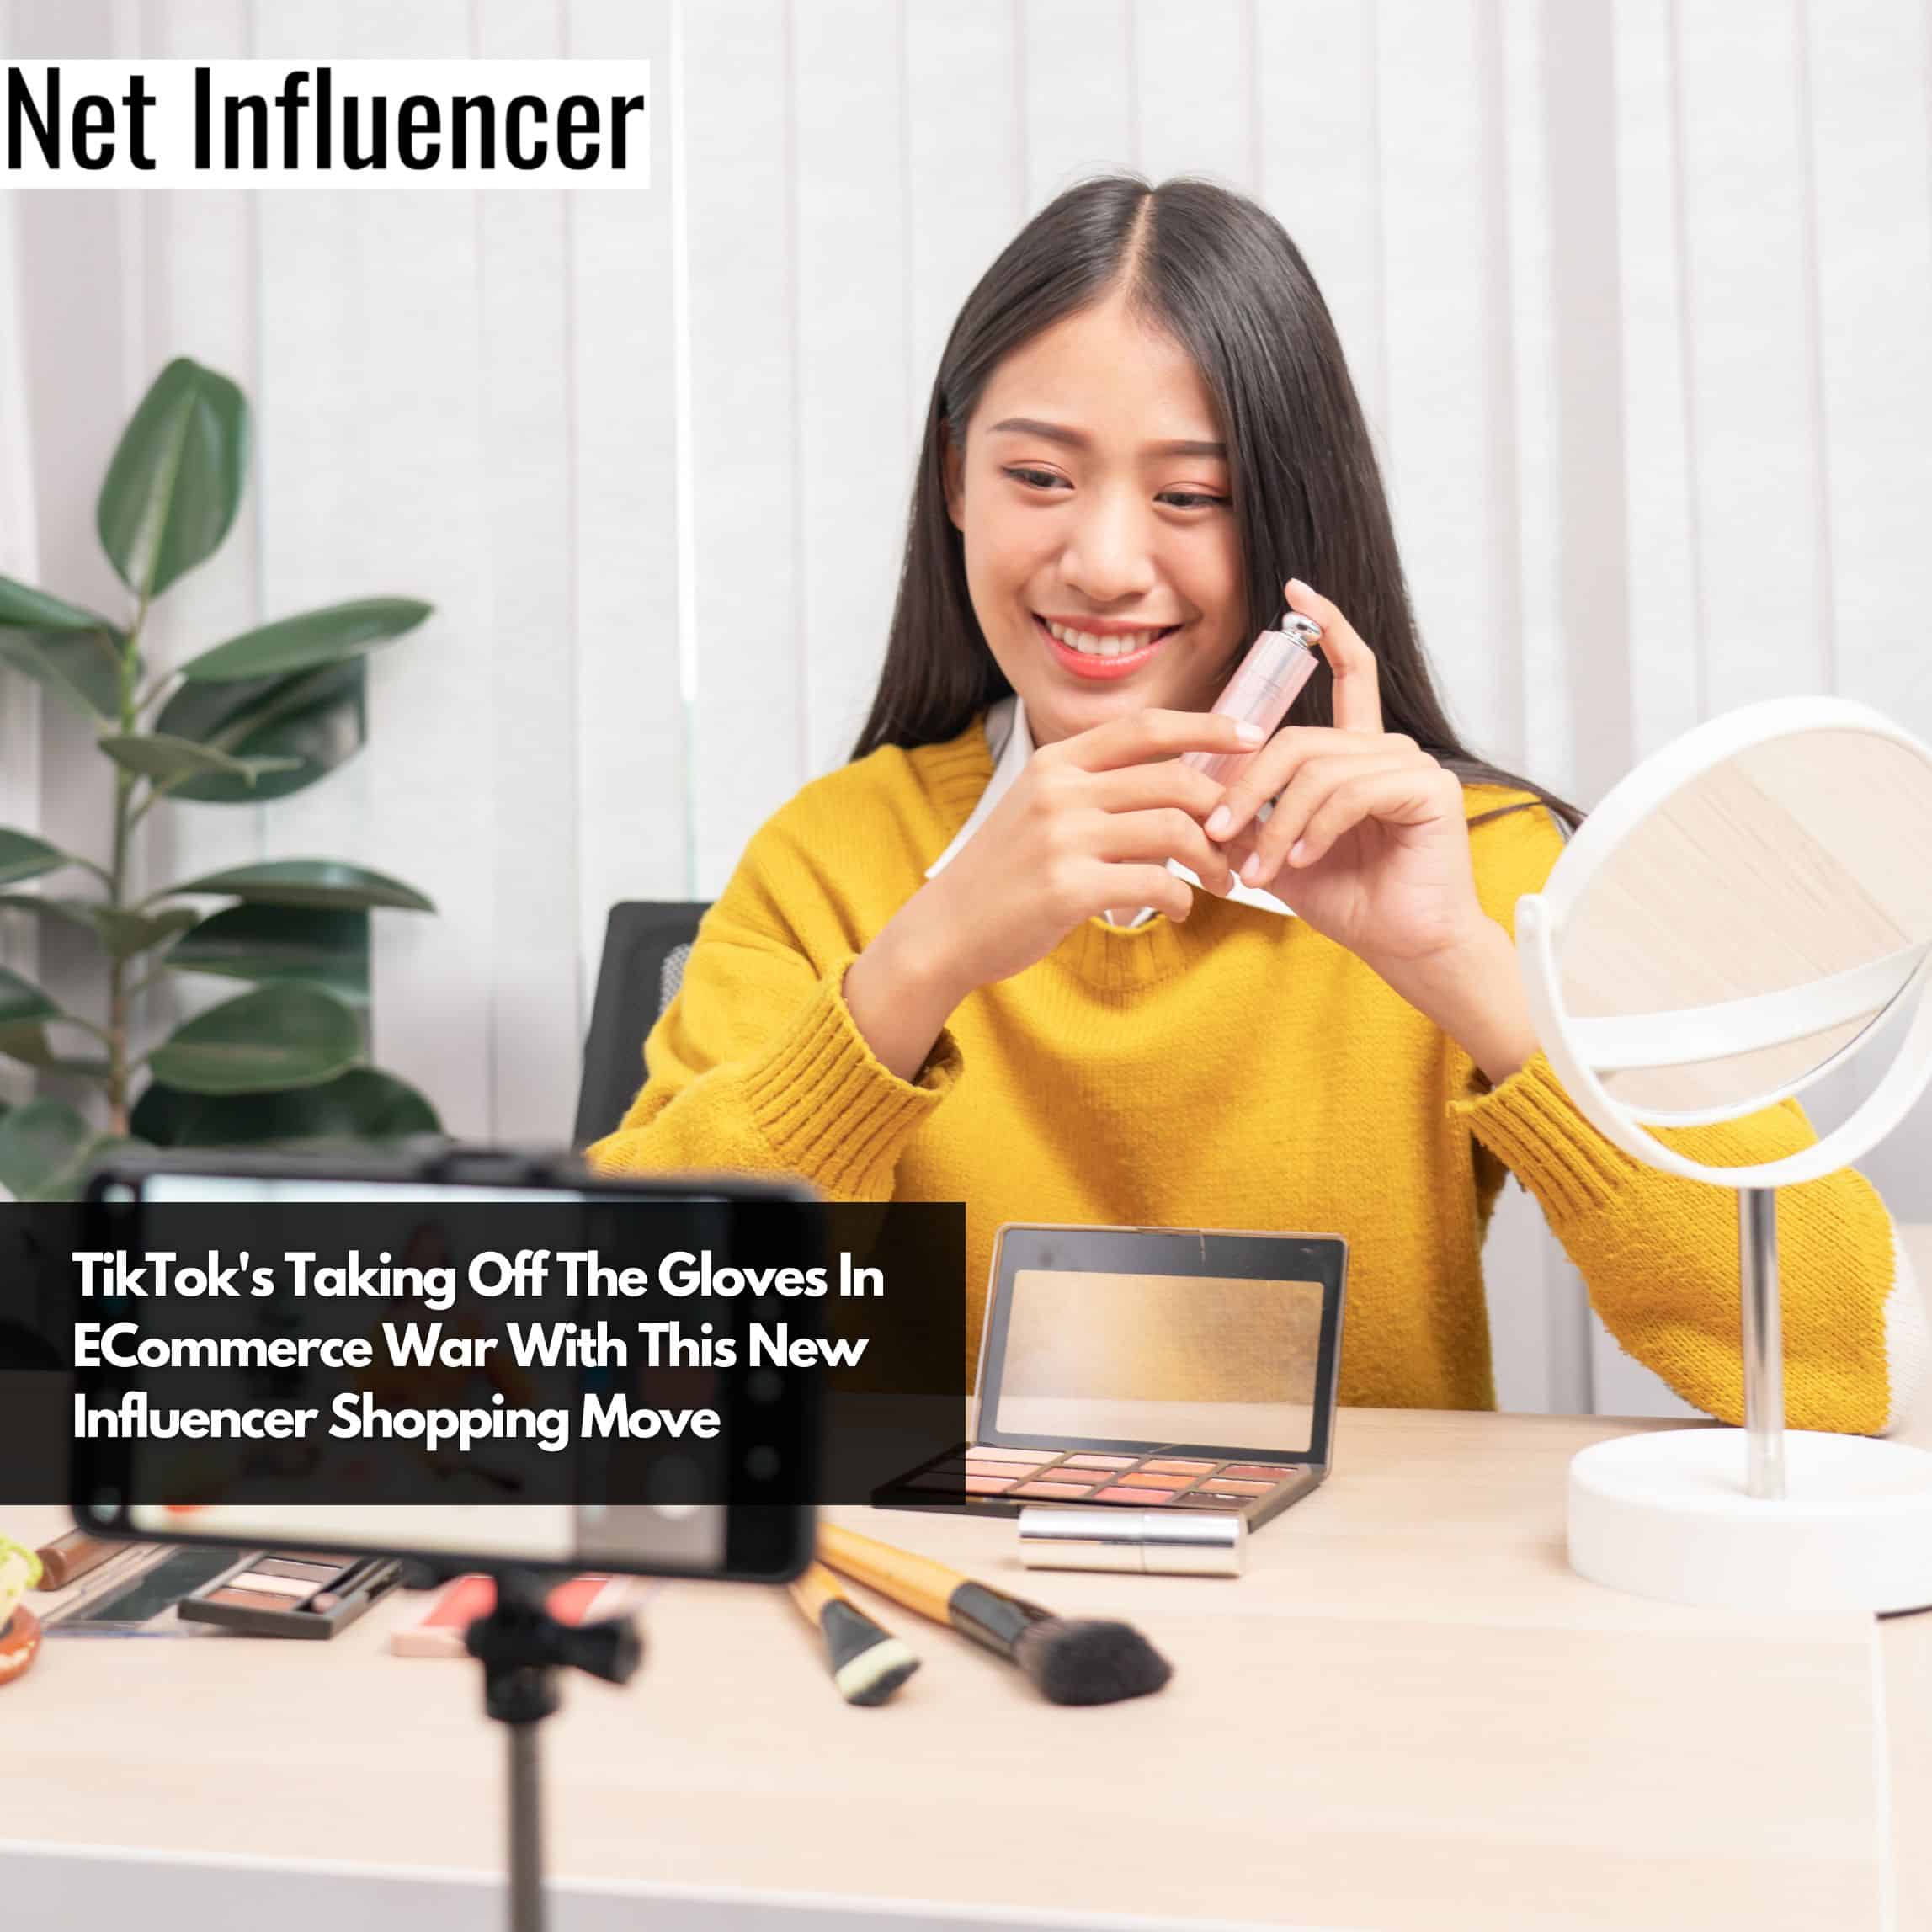 TikTok's Taking Off The Gloves In ECommerce War With This New Influencer Shopping Move